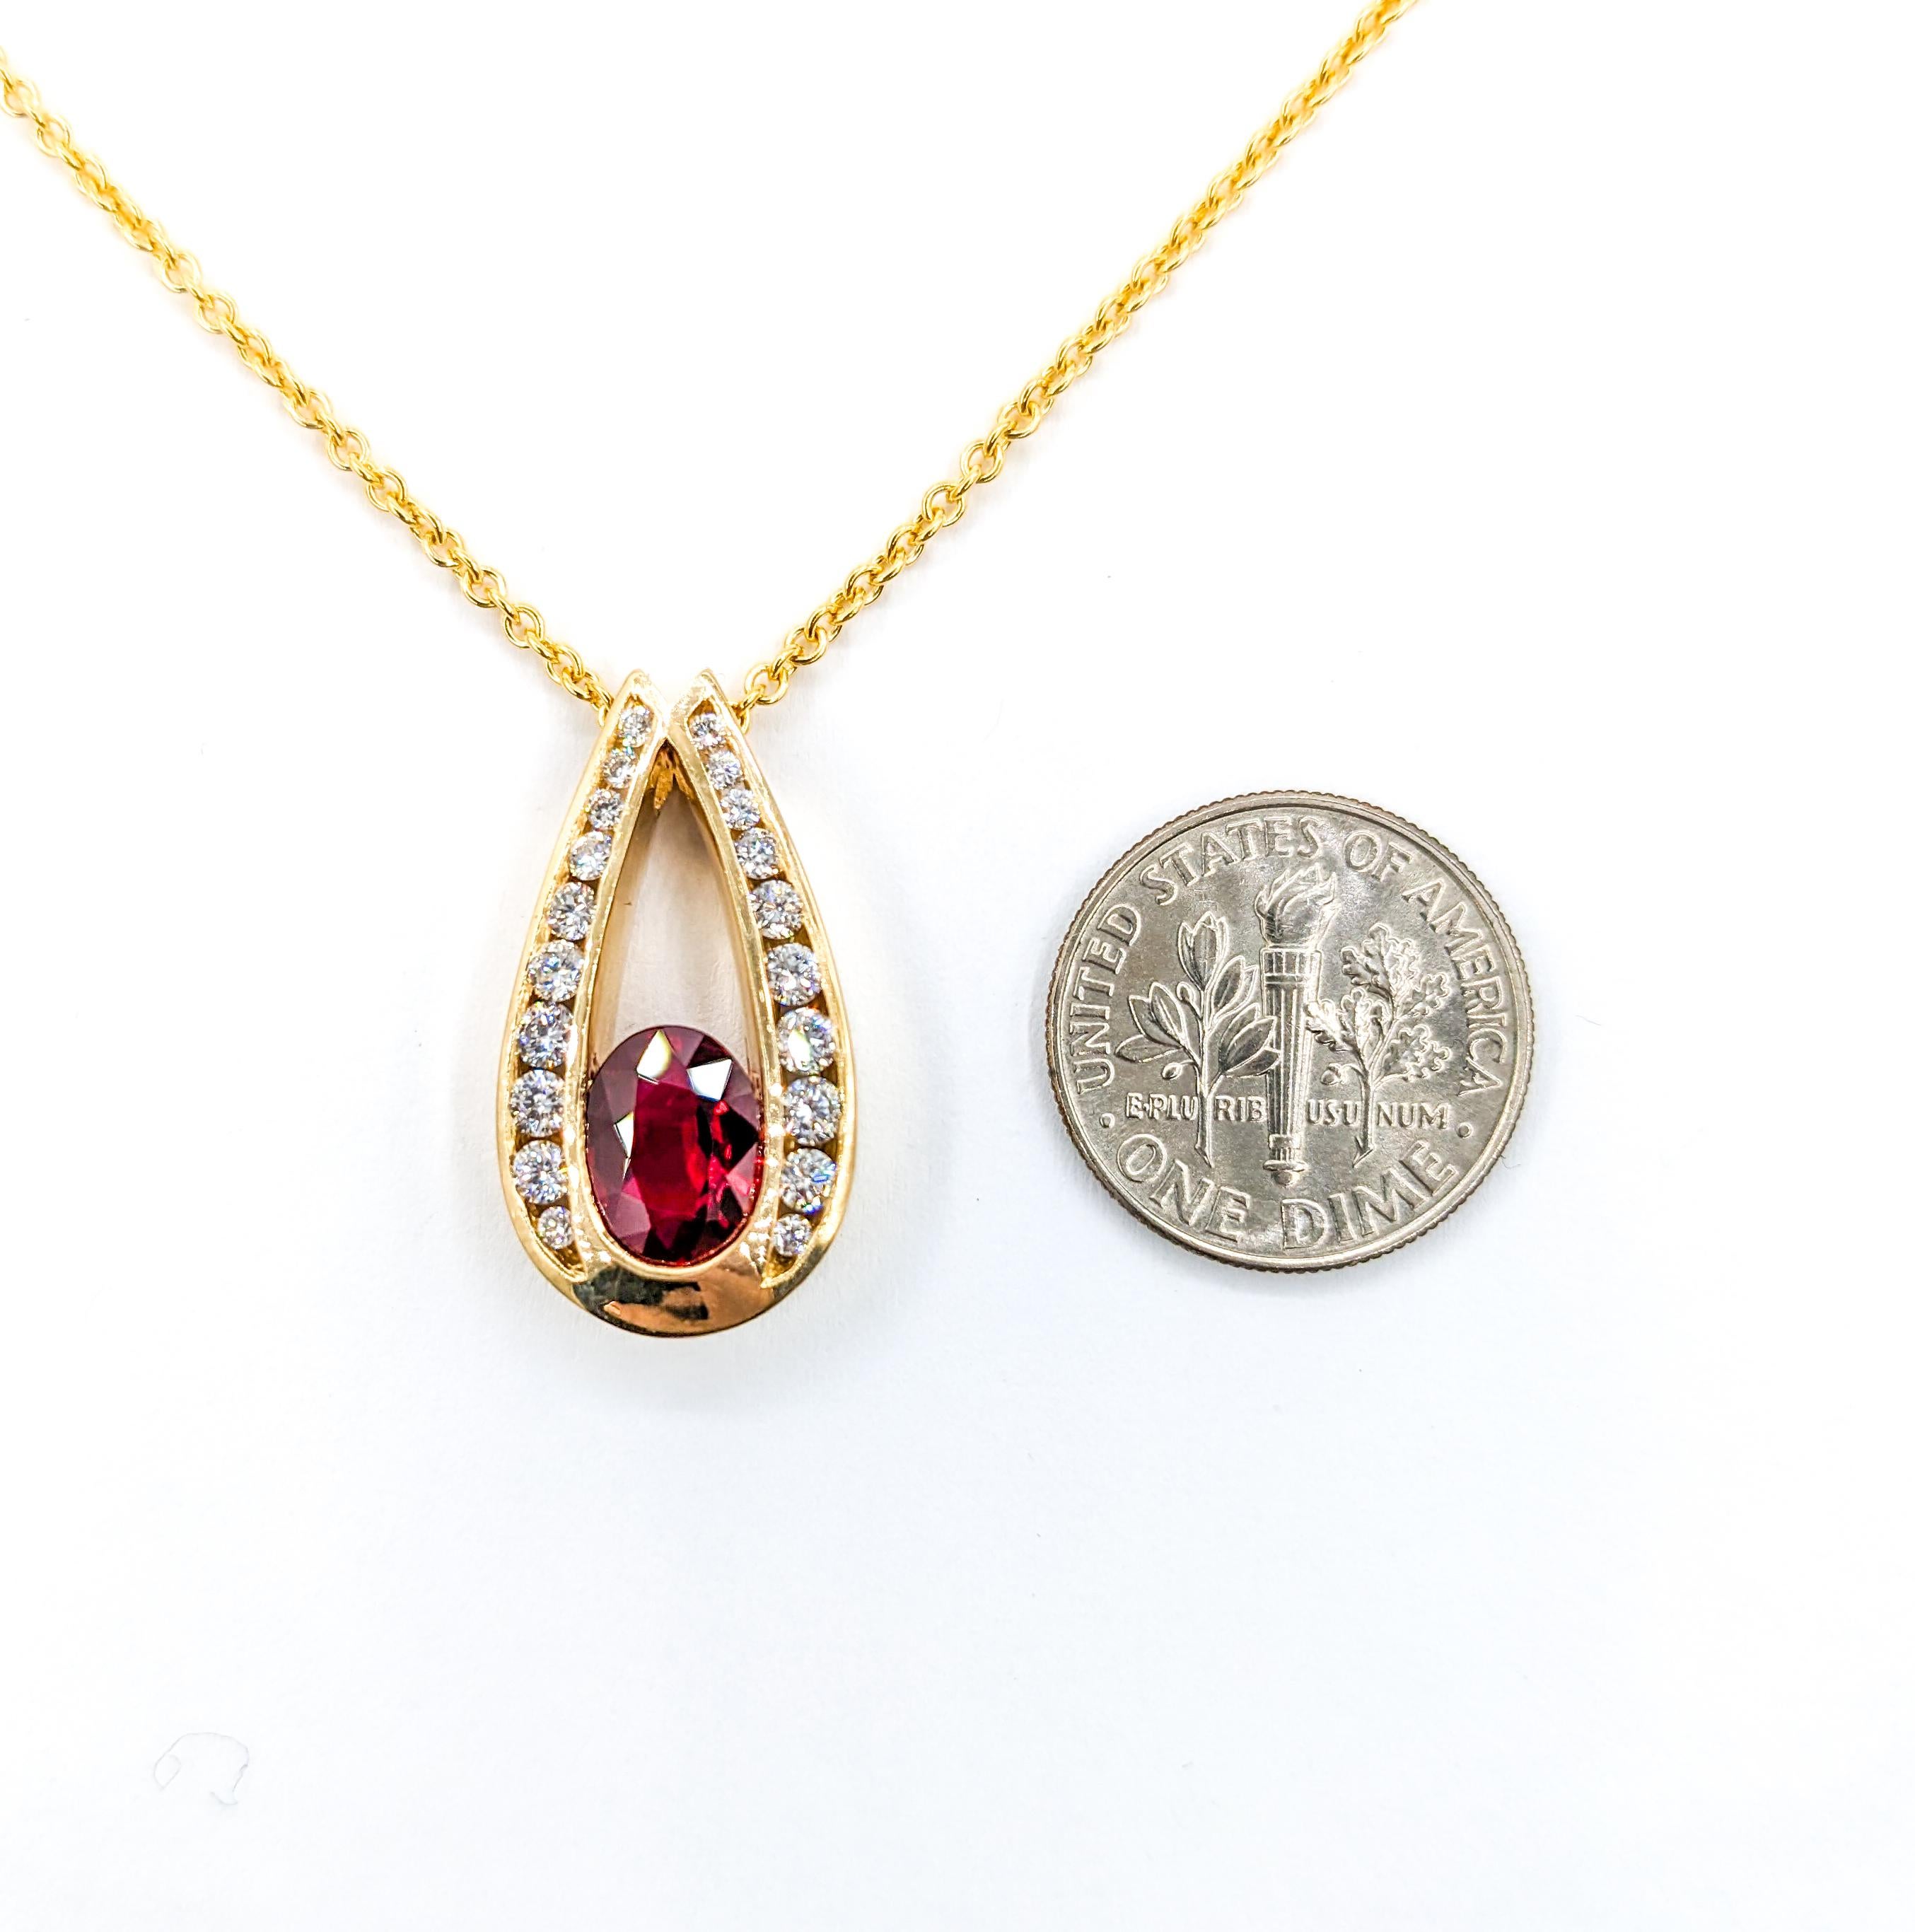 GIA 1.84ct Pigeons Blood Natural Ruby & Diamond Pendant With Chain

Introducing an exquisite natural Burmese Ruby 14K Pendant on an 18k Yellow Gold Chain. The pendant is expertly crafted in 14k Yellow Gold and adorned with a .61ctw of Round